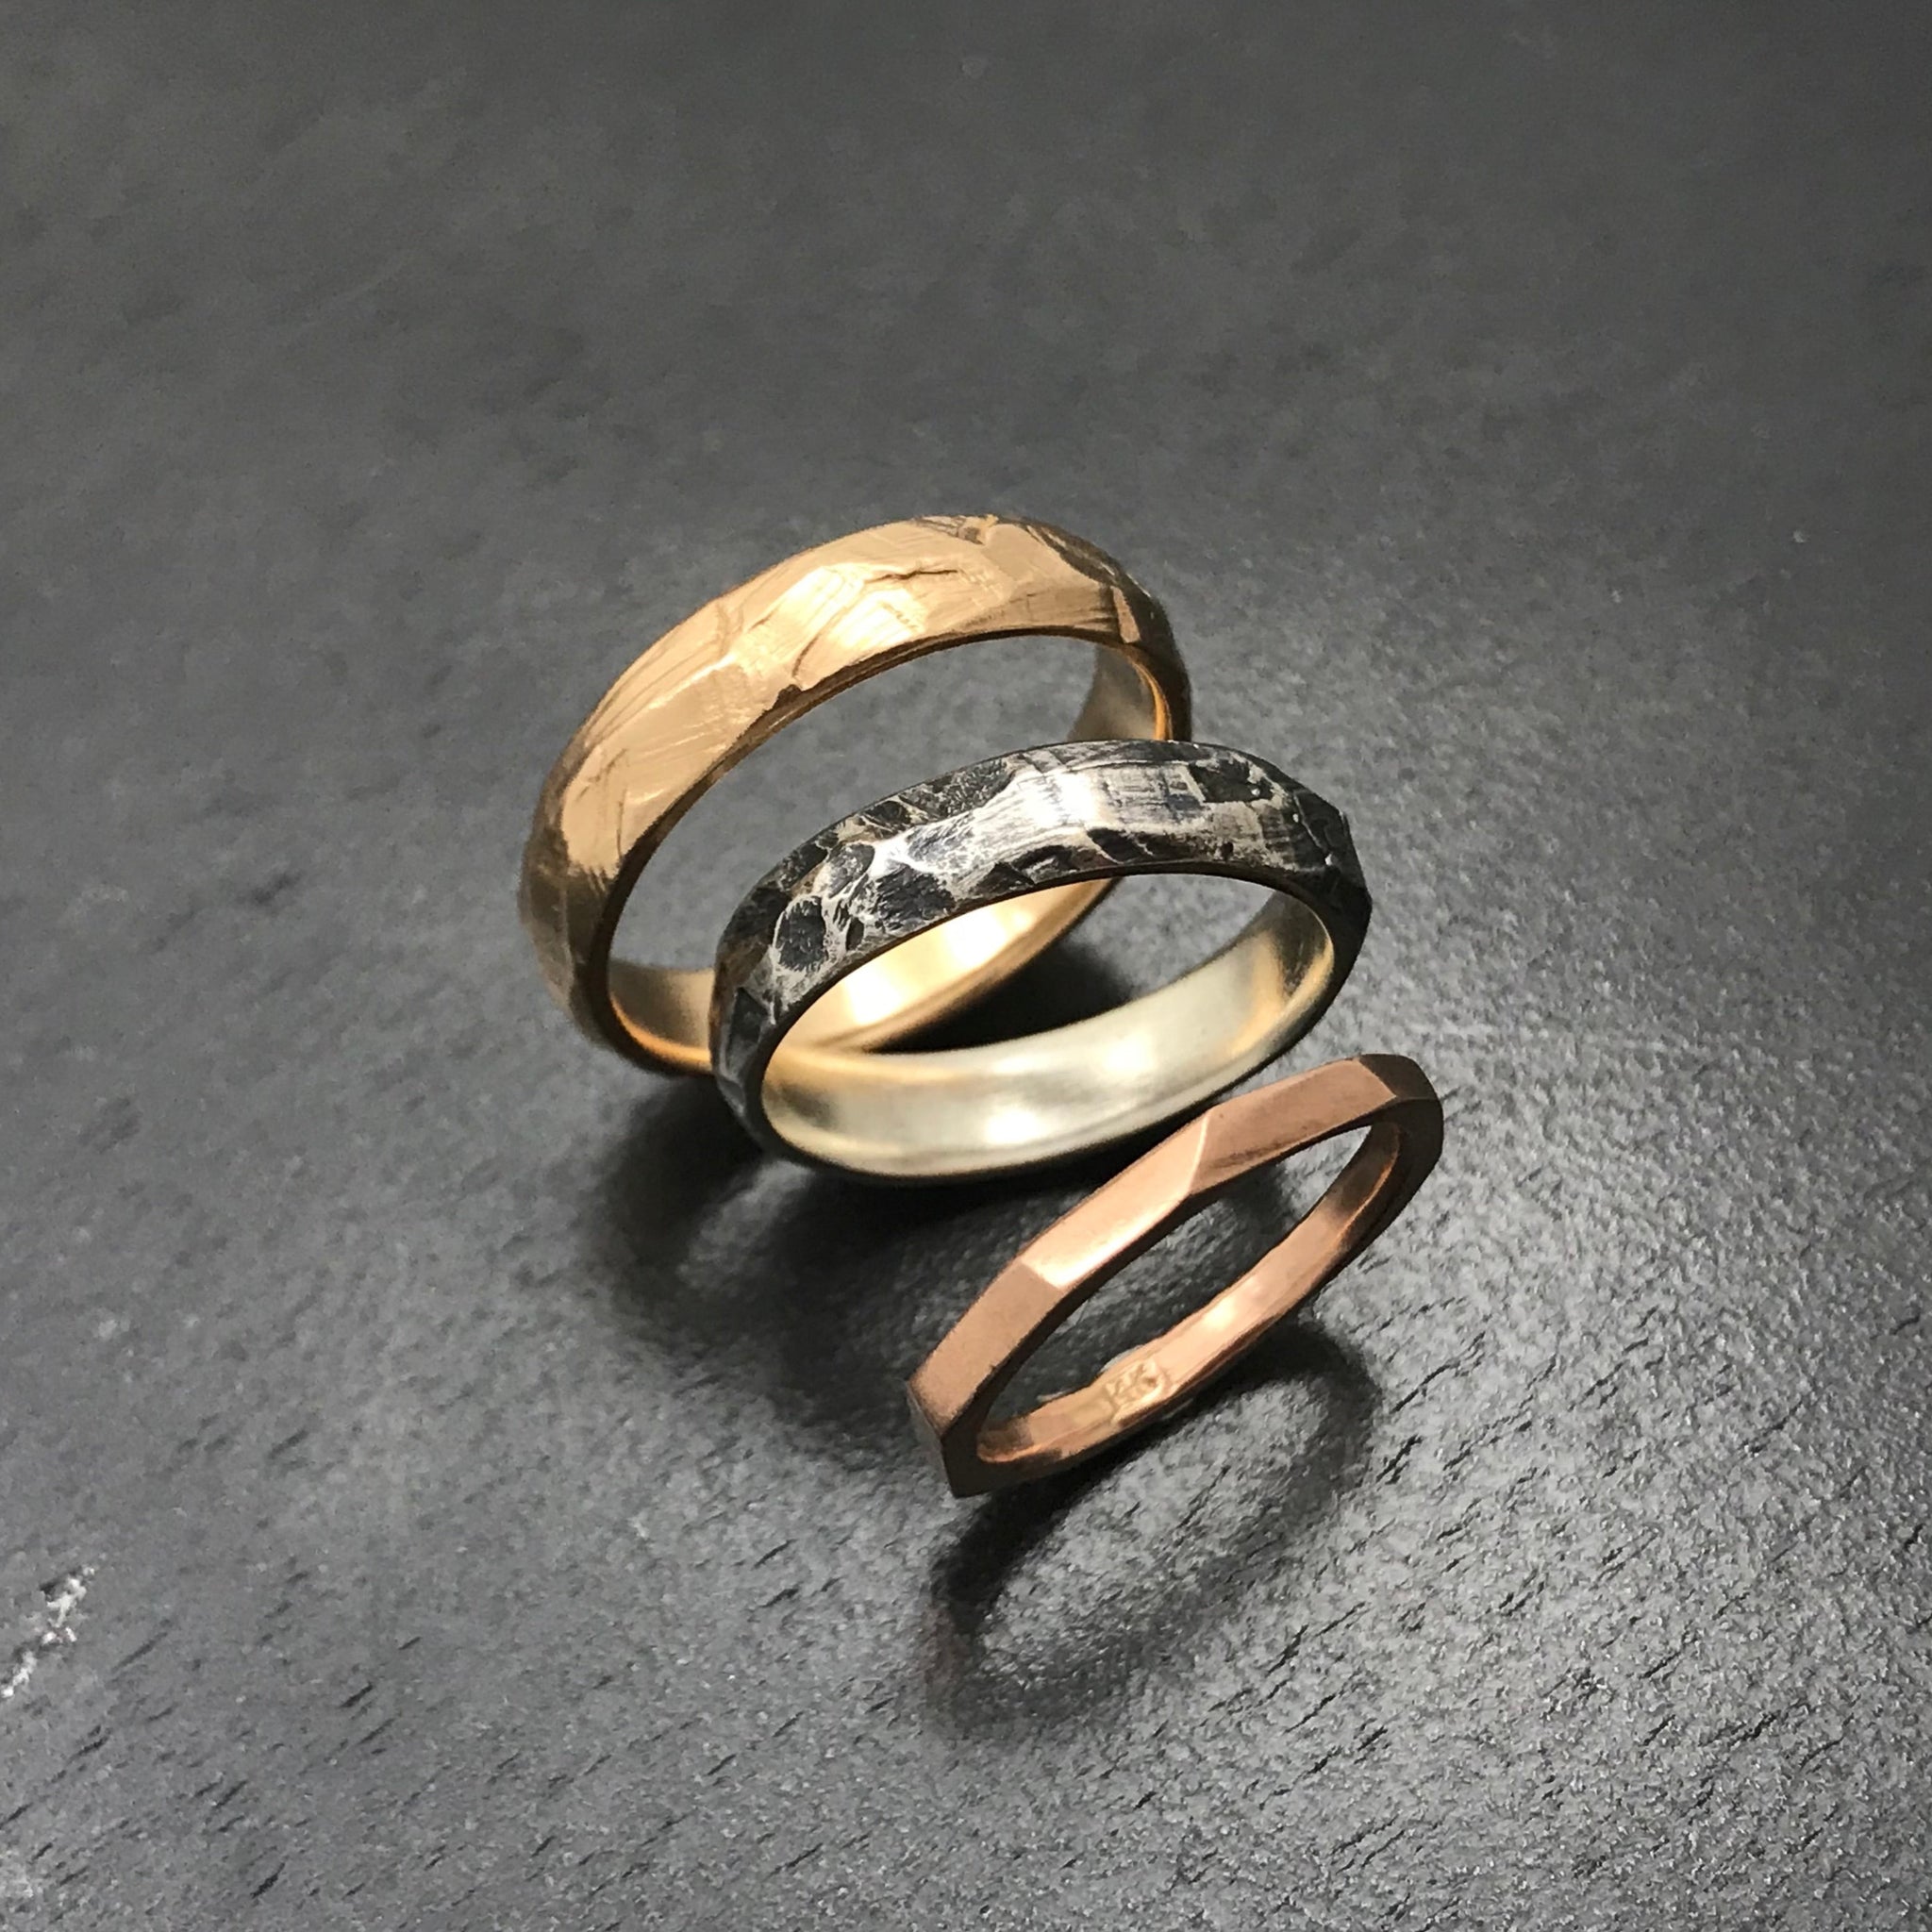 How To Make A Ring Band